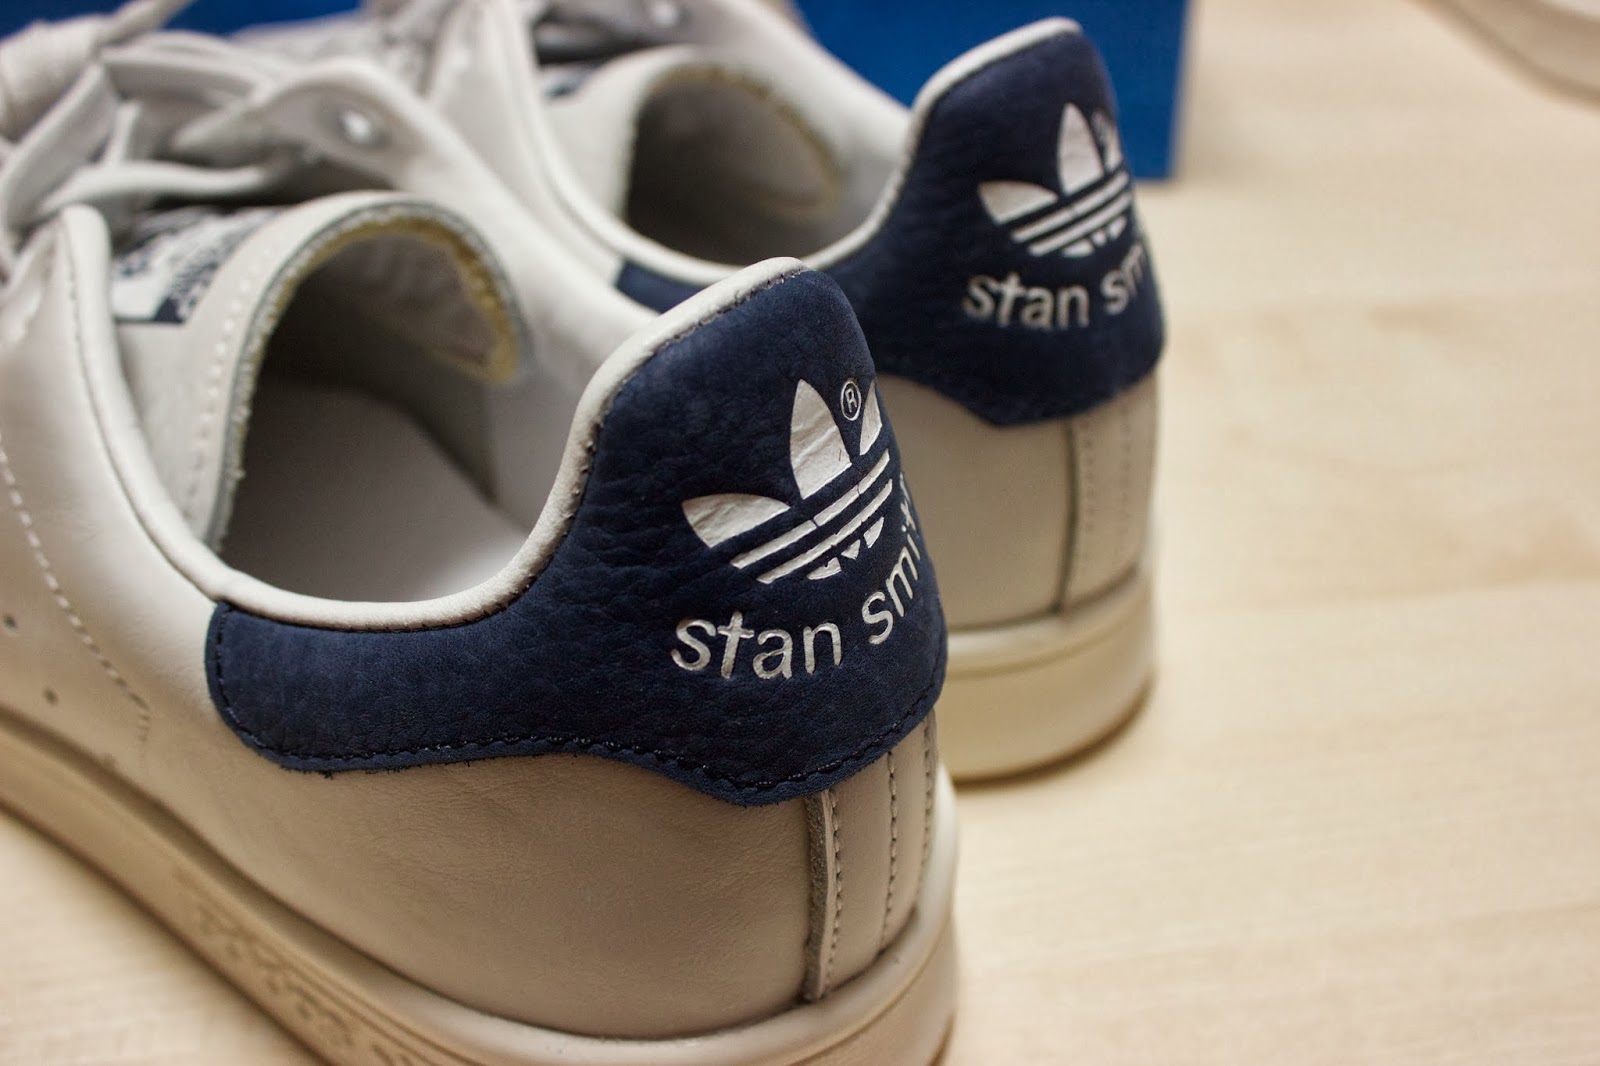 Goodbye, Our Pastels Badges さようならパステルズ・バッヂ: adidas Stan Smith 2014